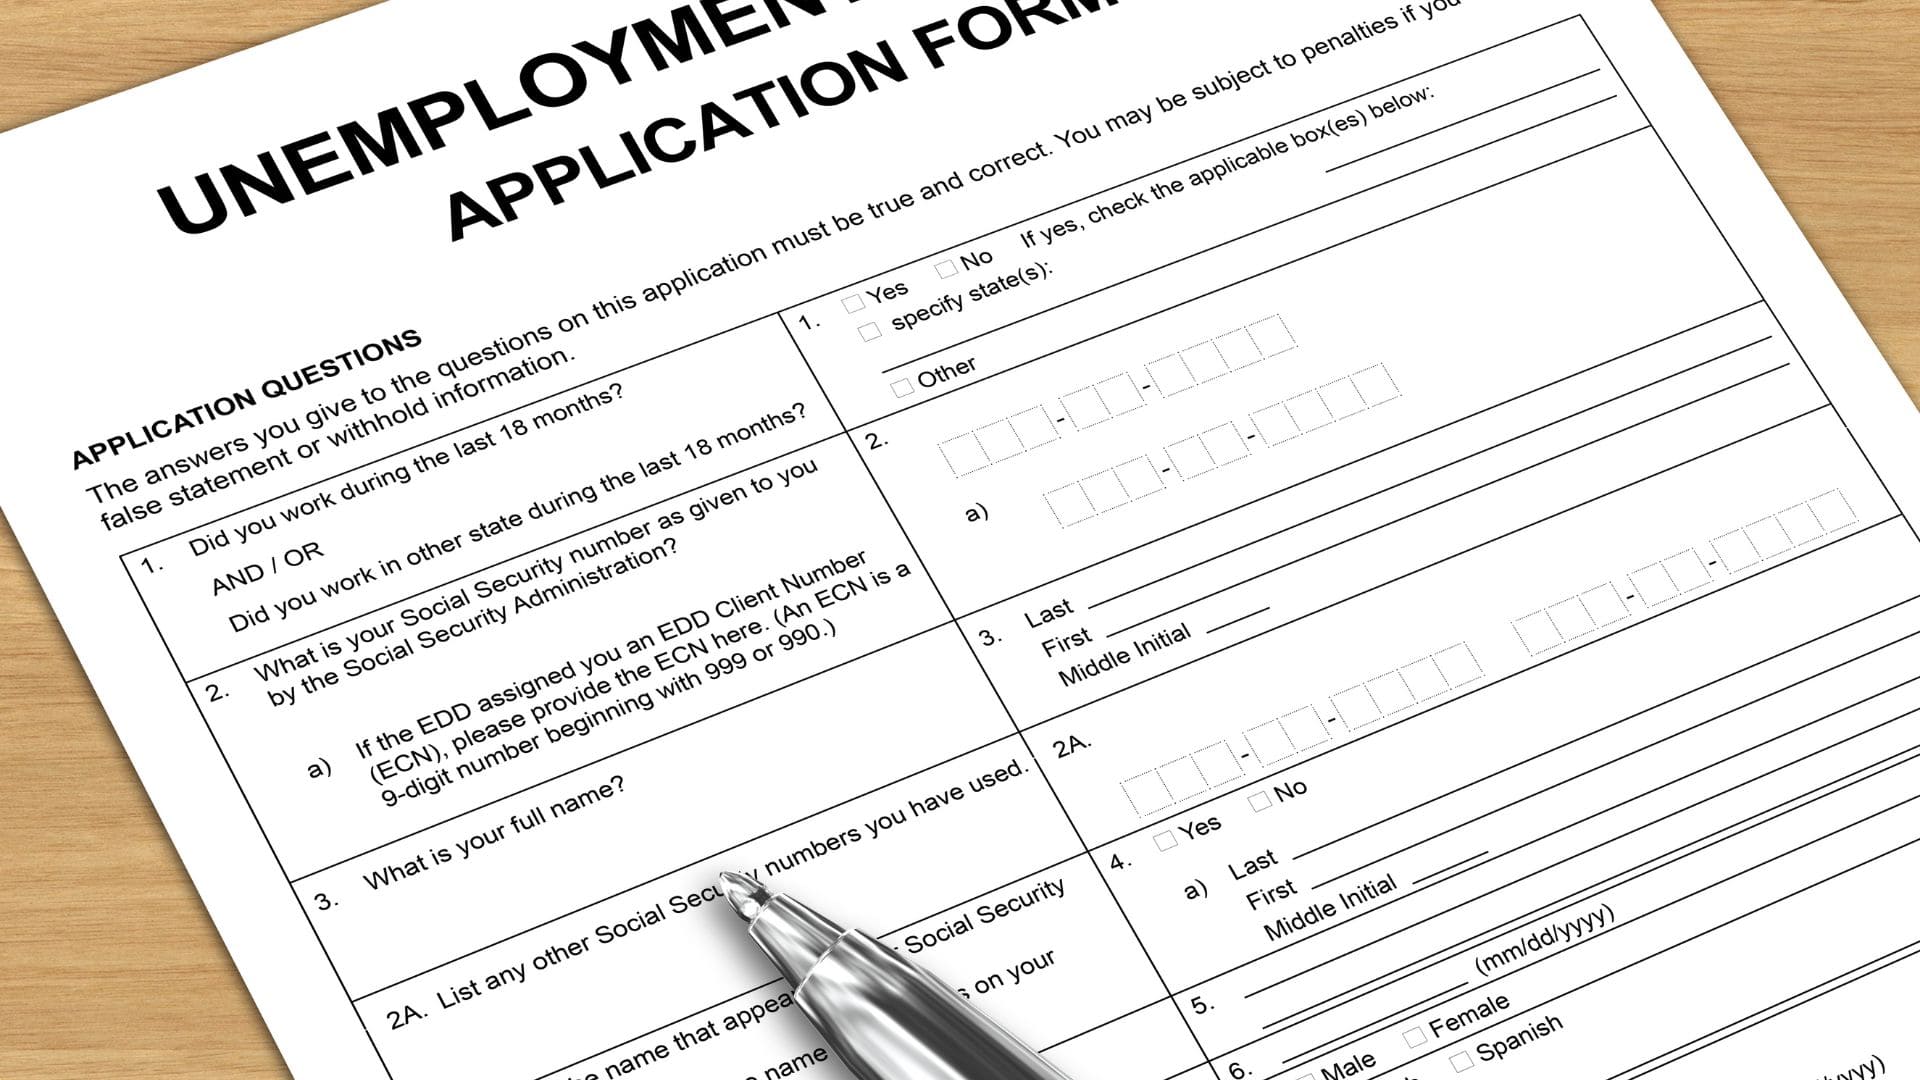 You could get a unemployment benefit only if you meet the requirements